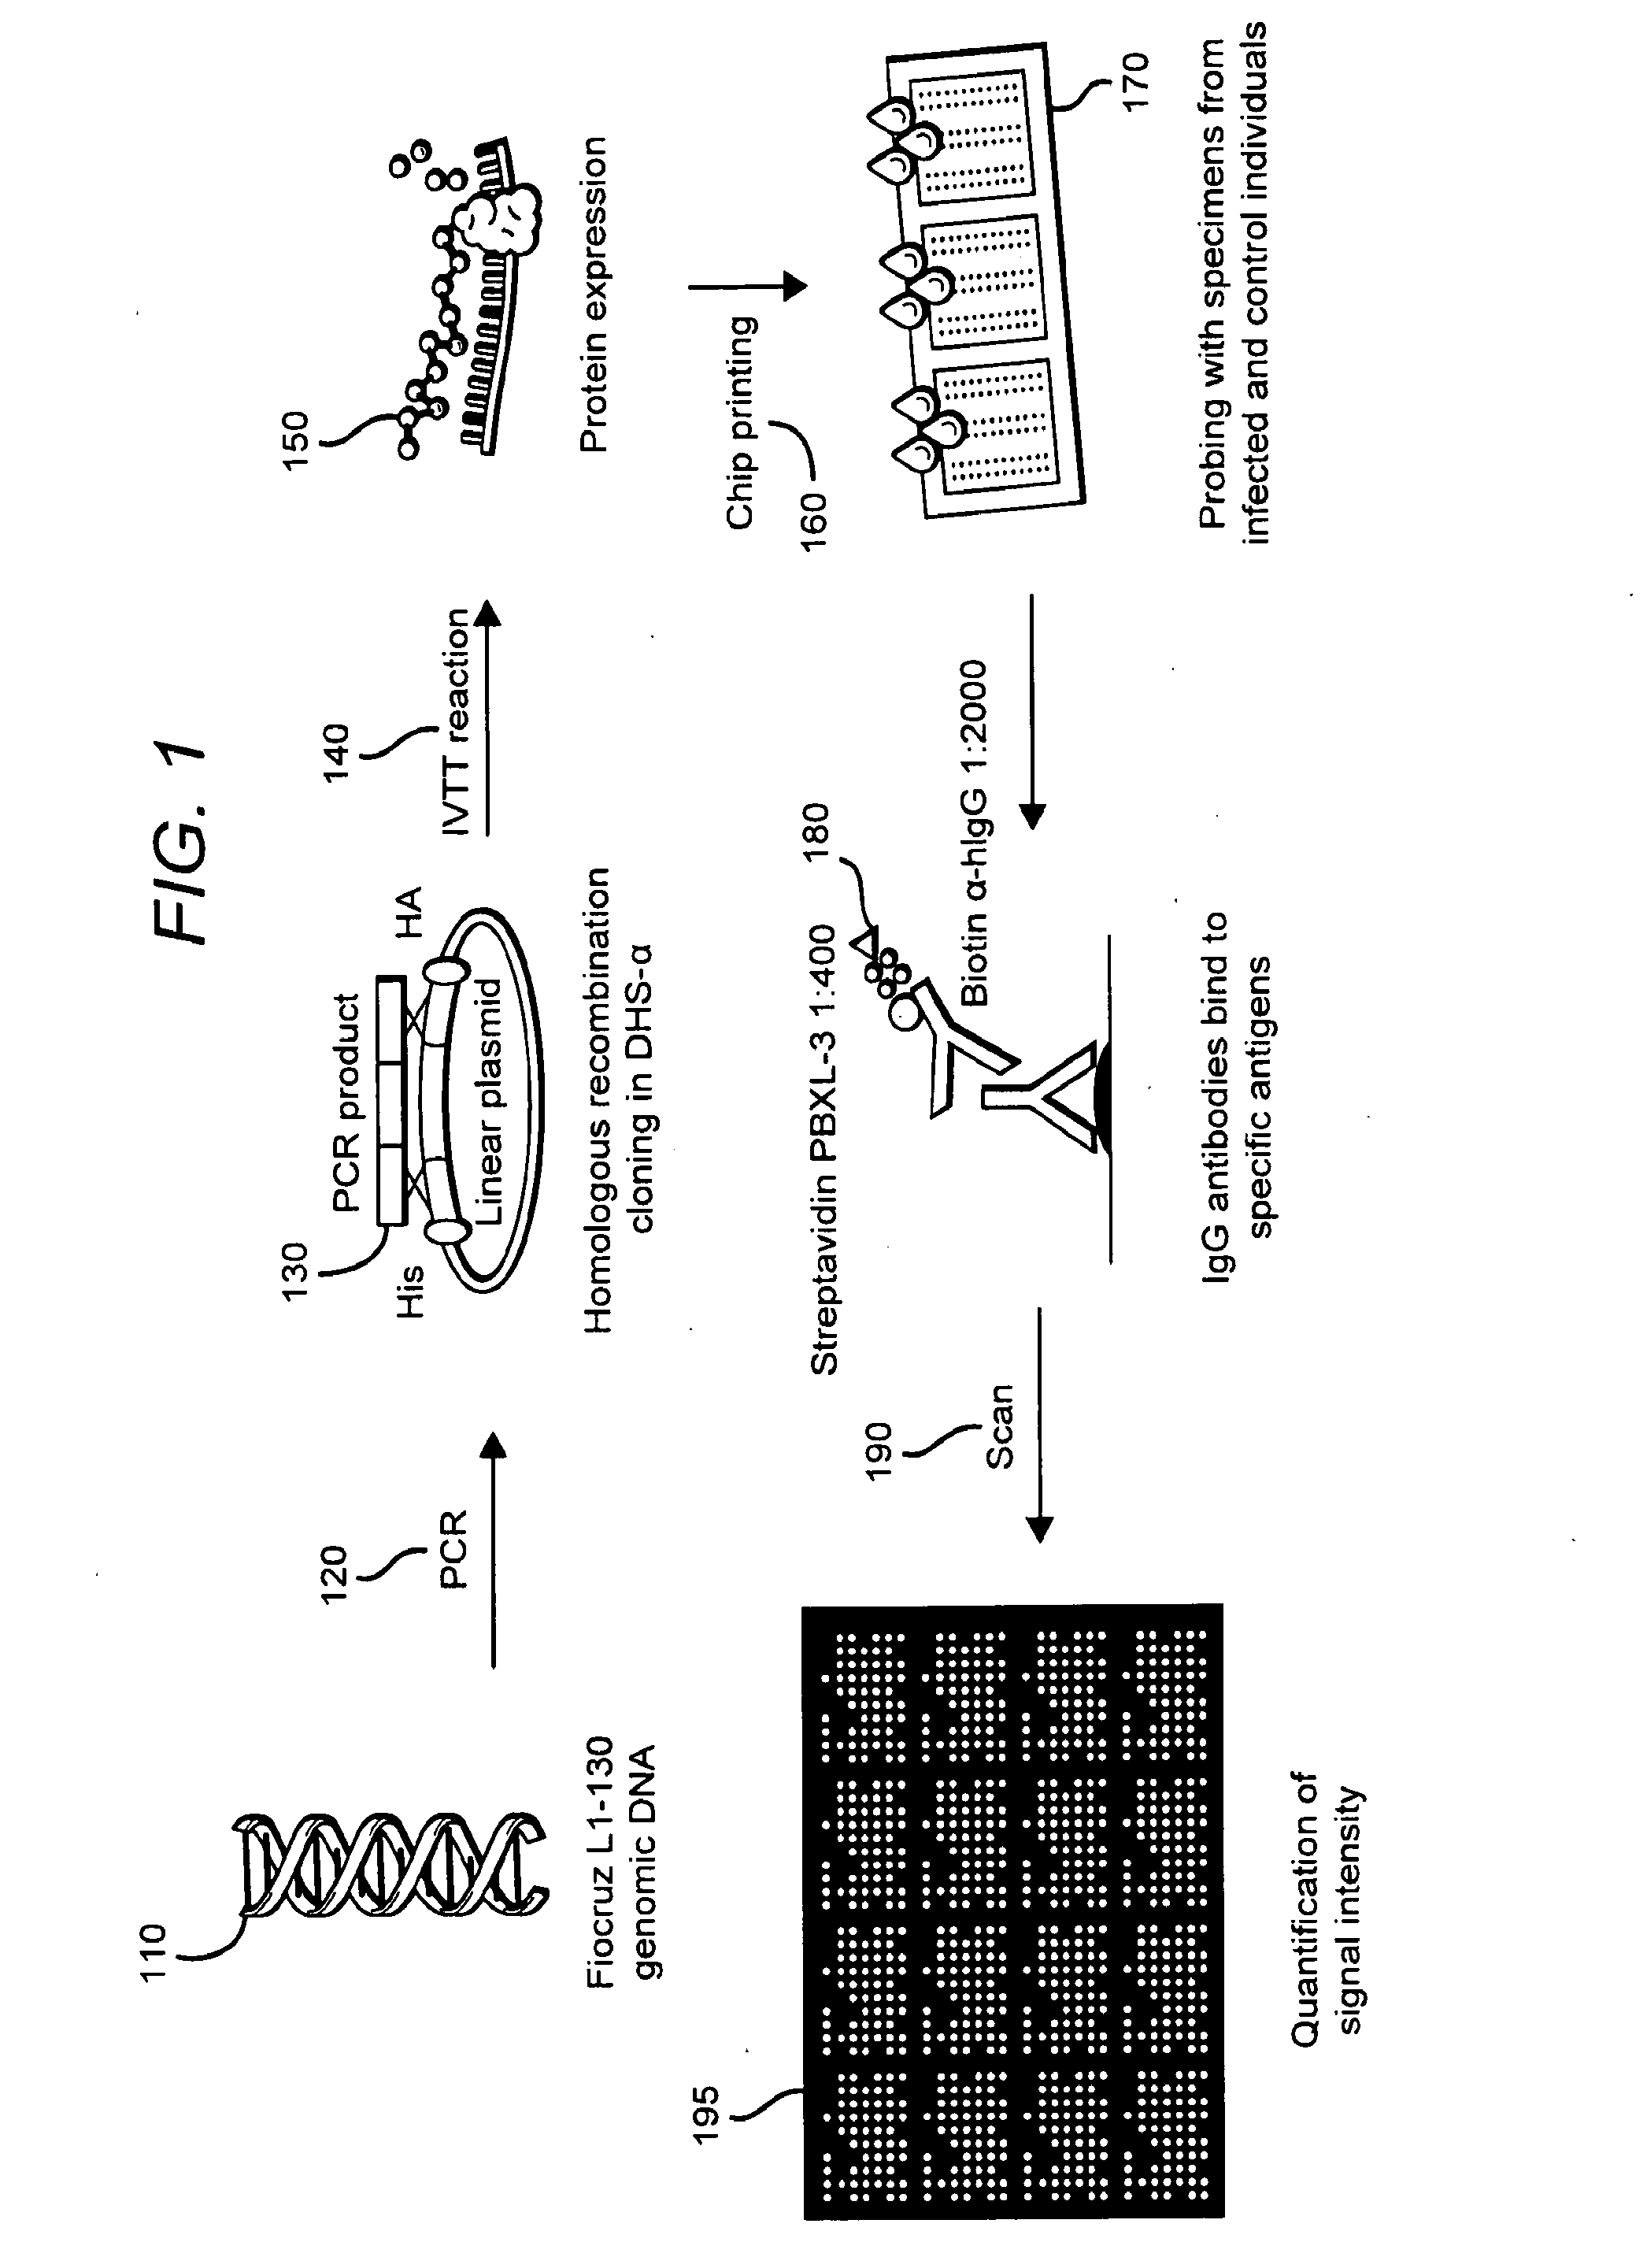 Methods and compositions of protein antigens for the diagnosis and treatment of leptospirosis